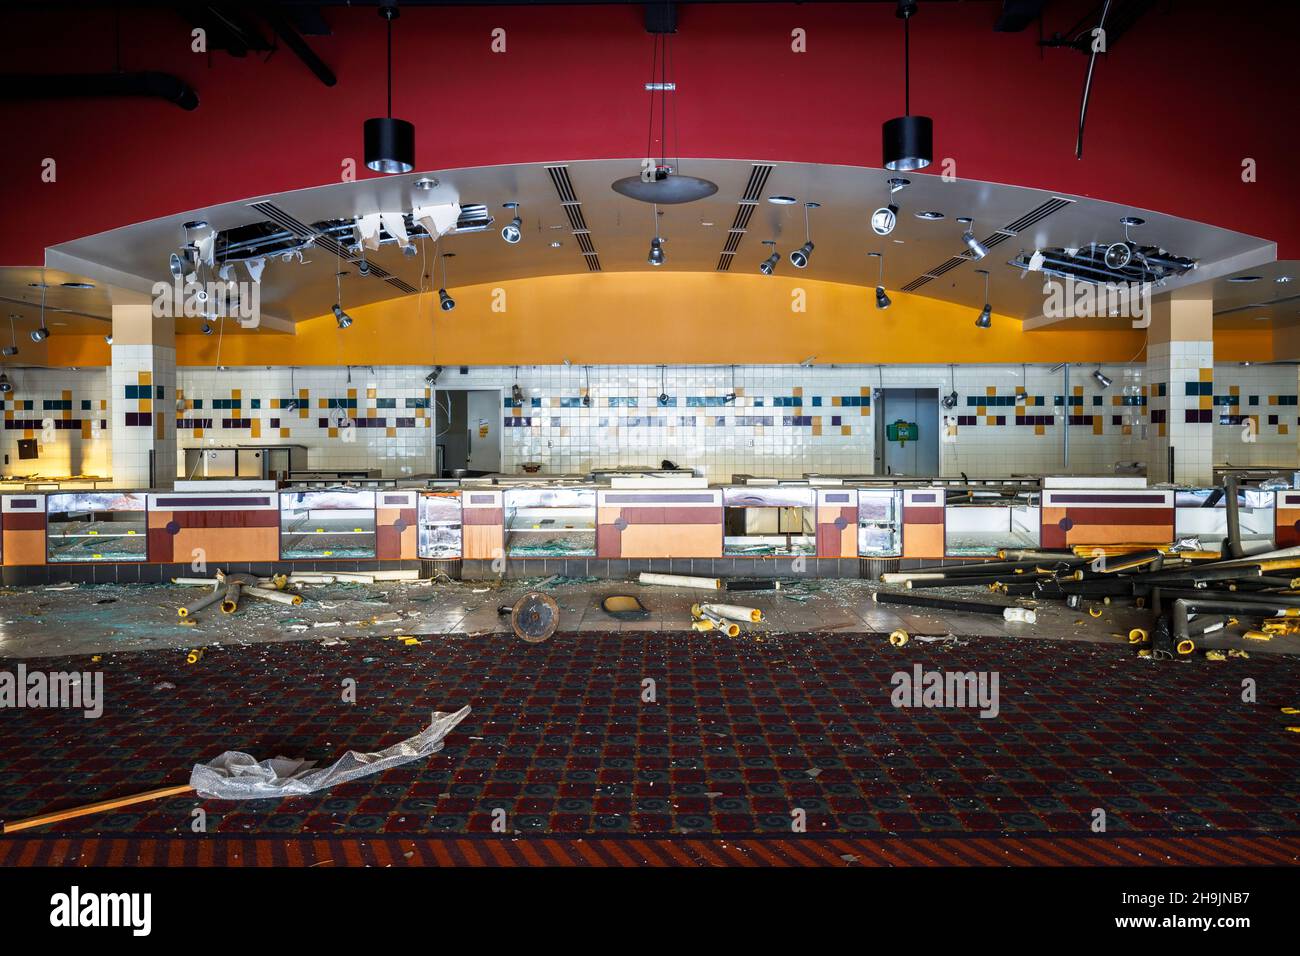 One of the concession stands at the AMC Interchange 30 Theatre during demolition. Vaughan, Ontario, Canada. This location has since been demolished. Stock Photo